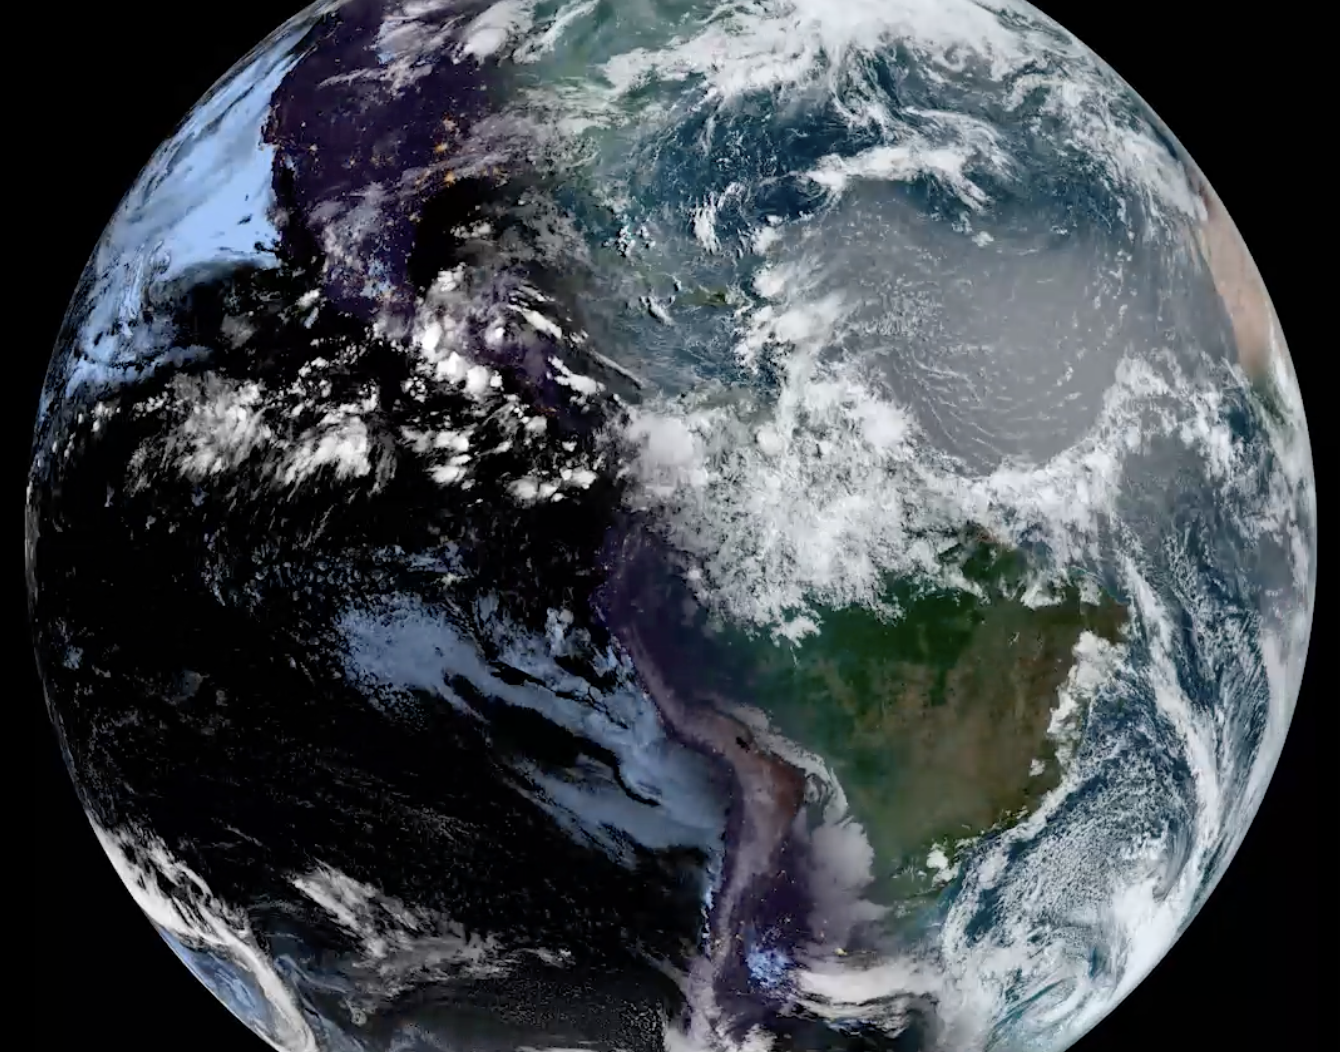 GOES East Observes the Vernal Equinox As the Seasons Shift